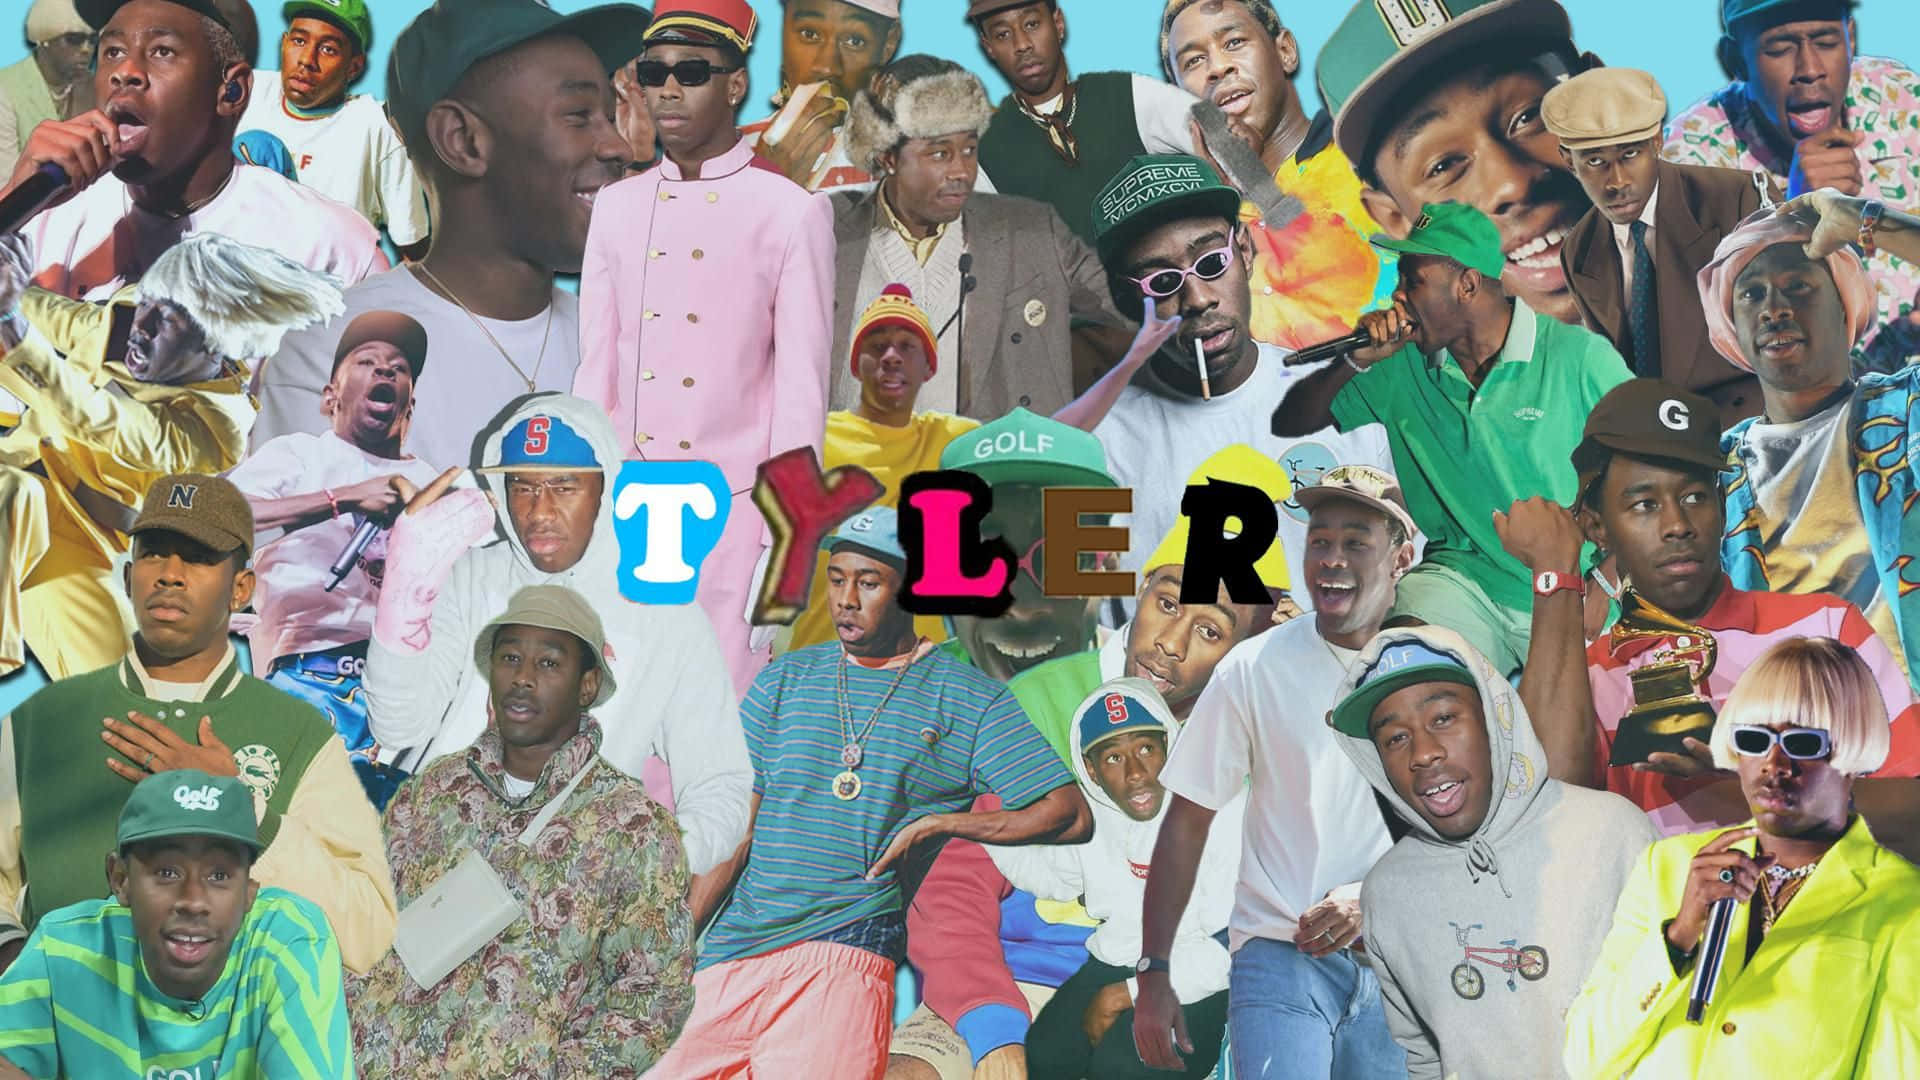 Tyler the Creator making waves.